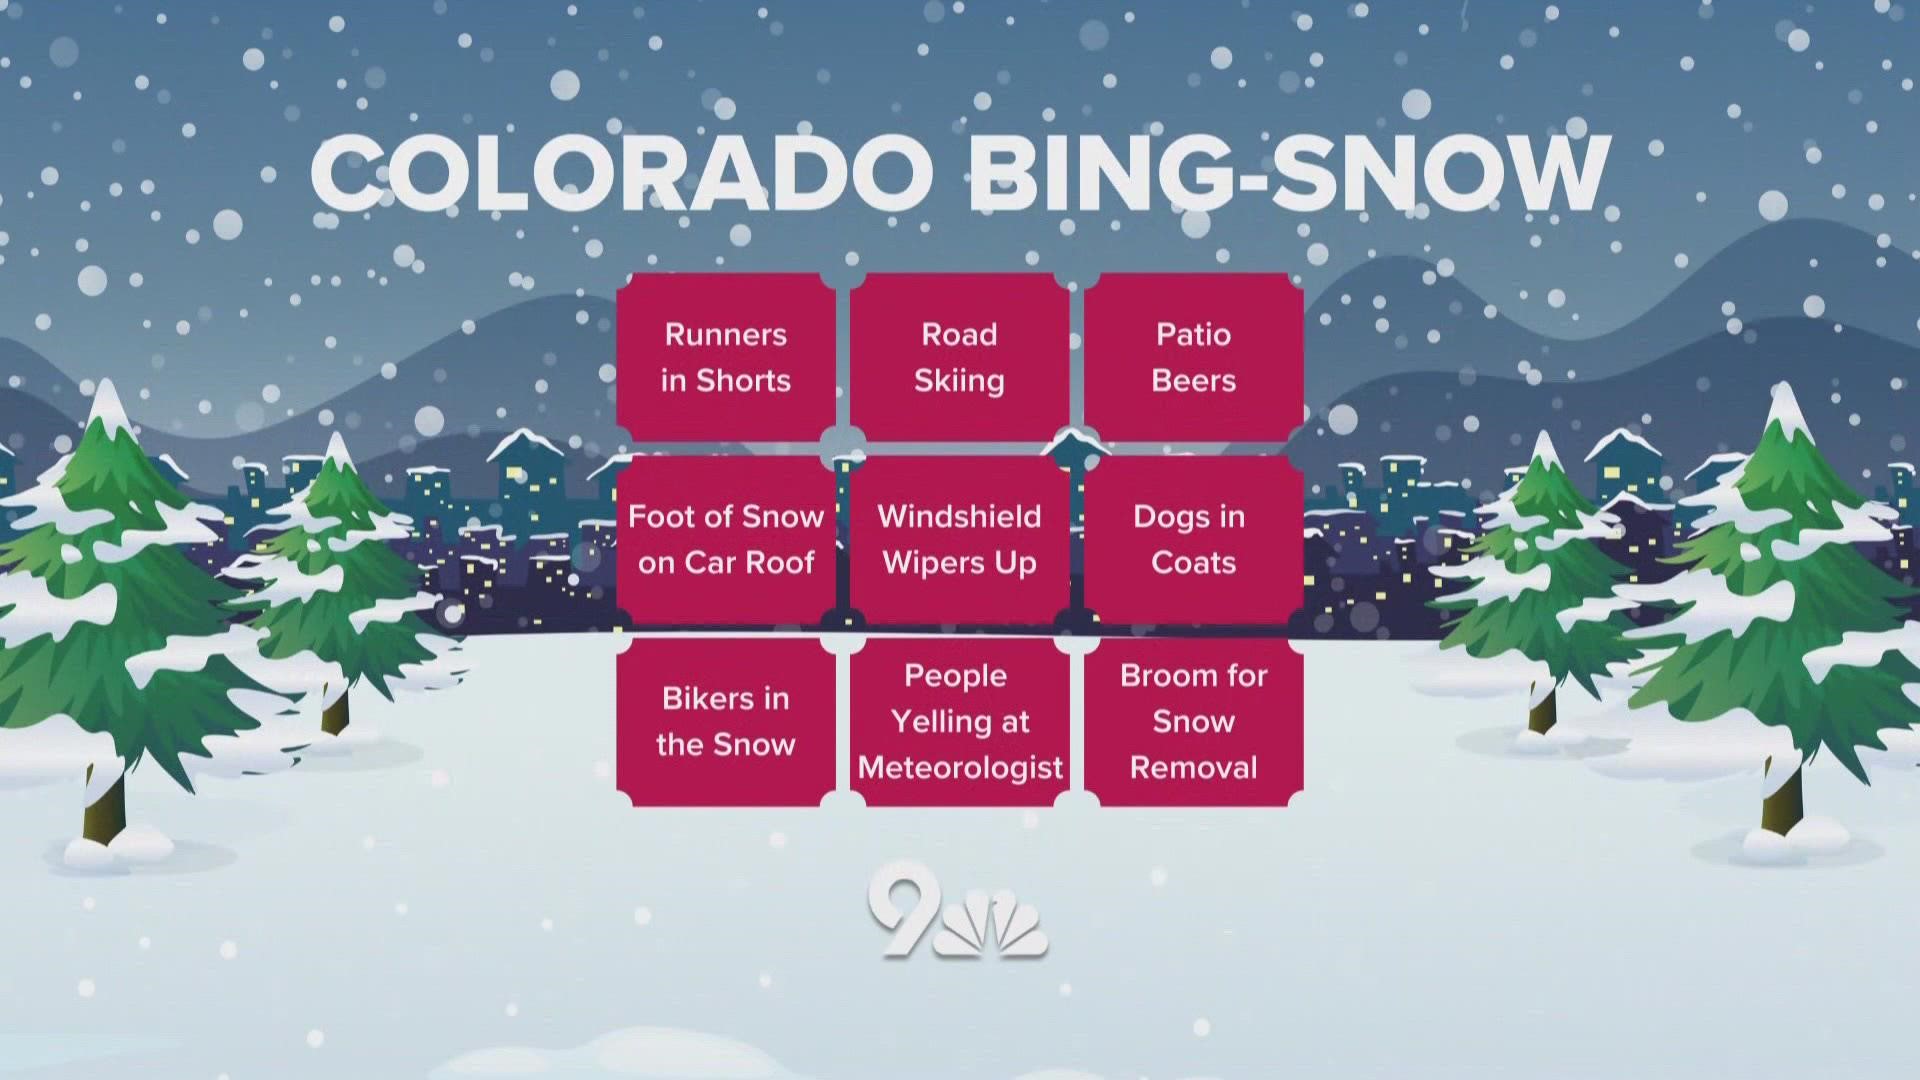 9NEWS Reporter Steve Staeger plays a bit of "snow bingo" on a Colorado snow day where people do some out-of-the-box activities.